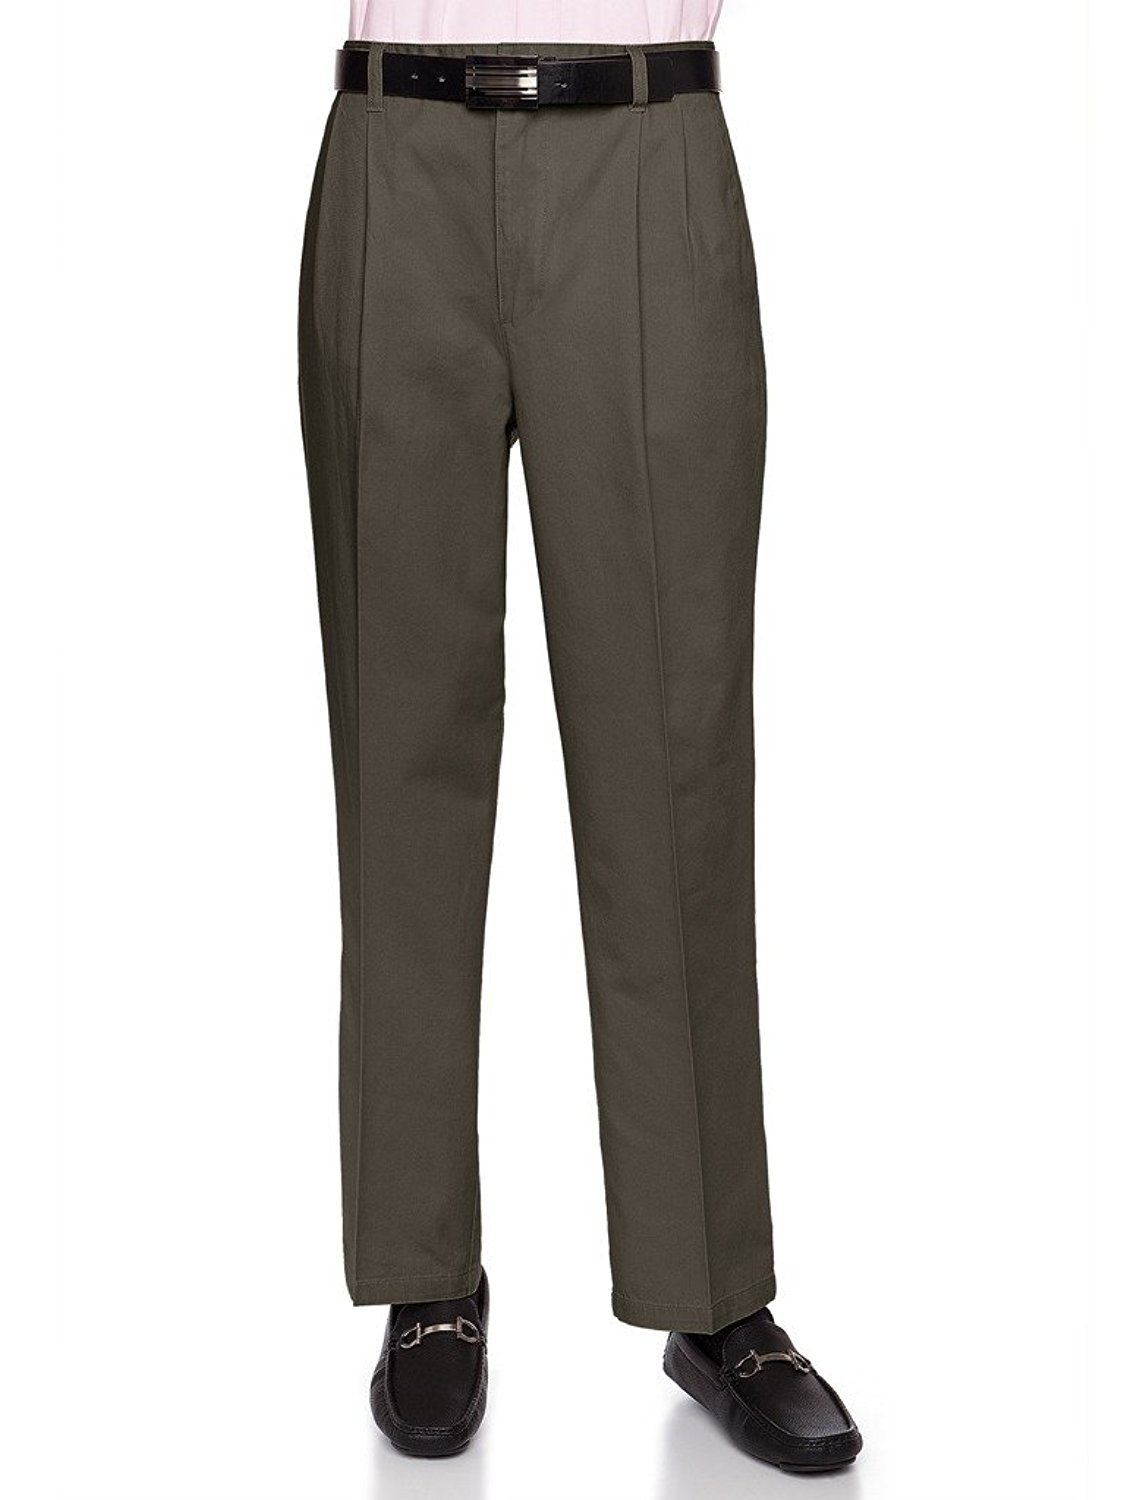 Relaxed Fit Twill pull-on trousers - Khaki green - Men | H&M IN